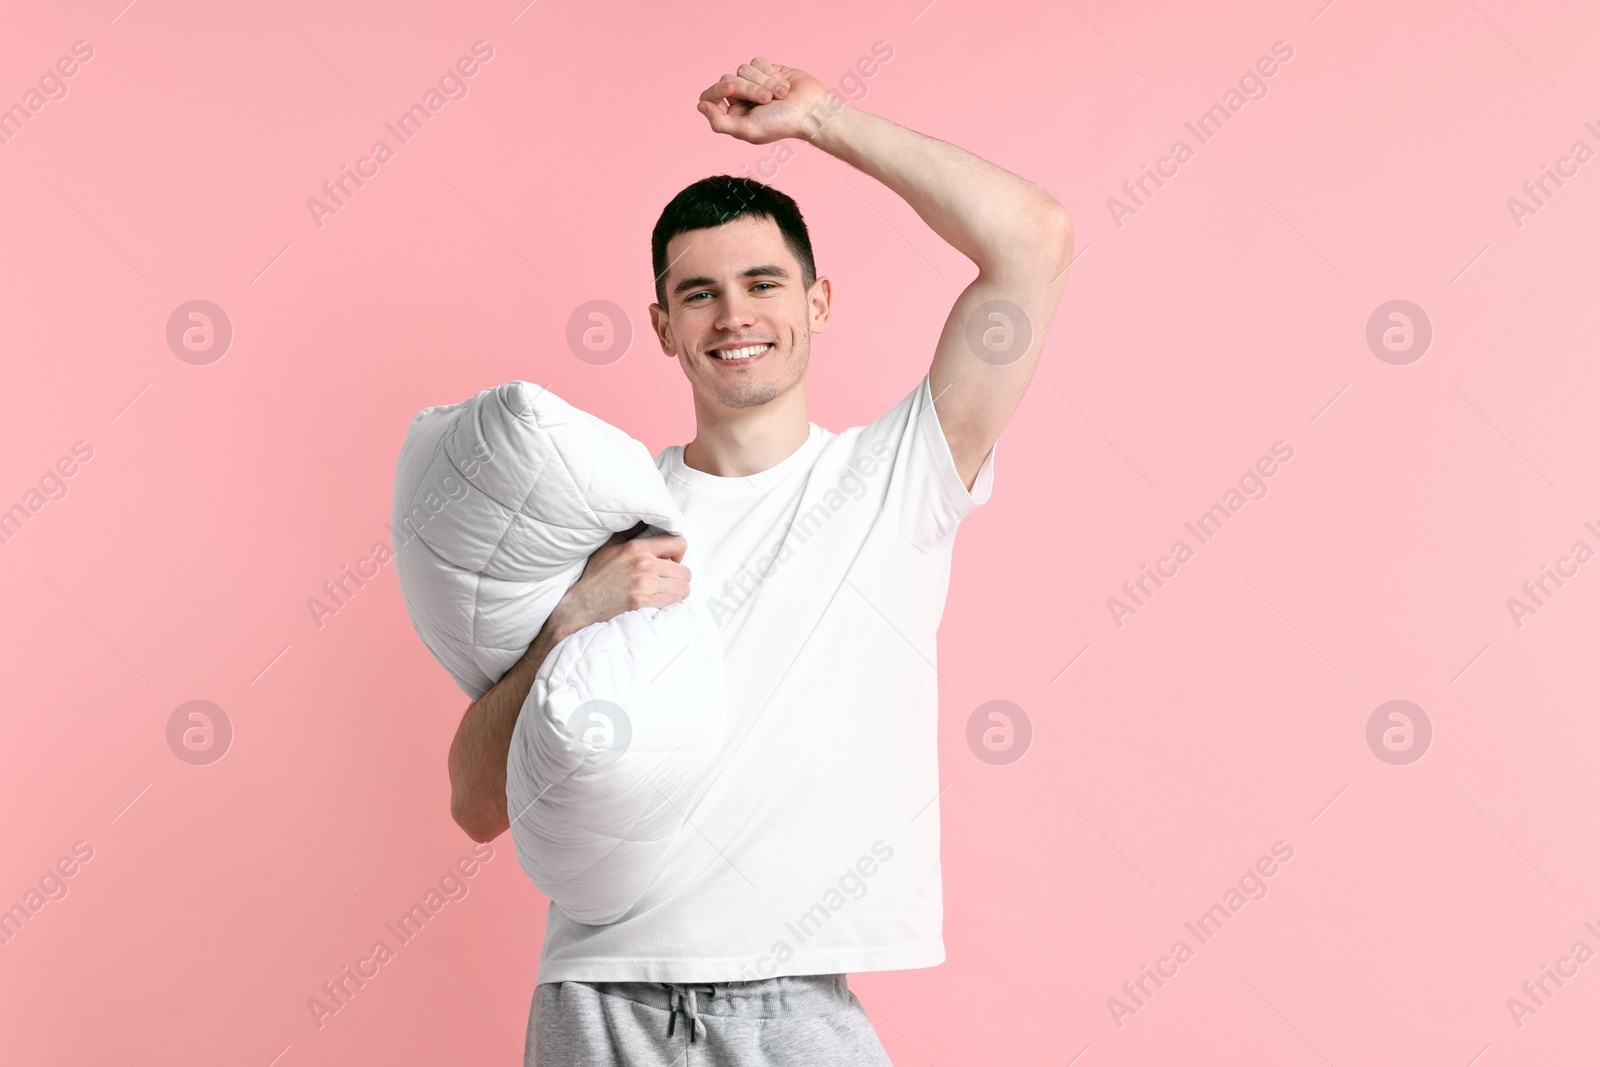 Photo of Happy man in pyjama holding pillow on pink background